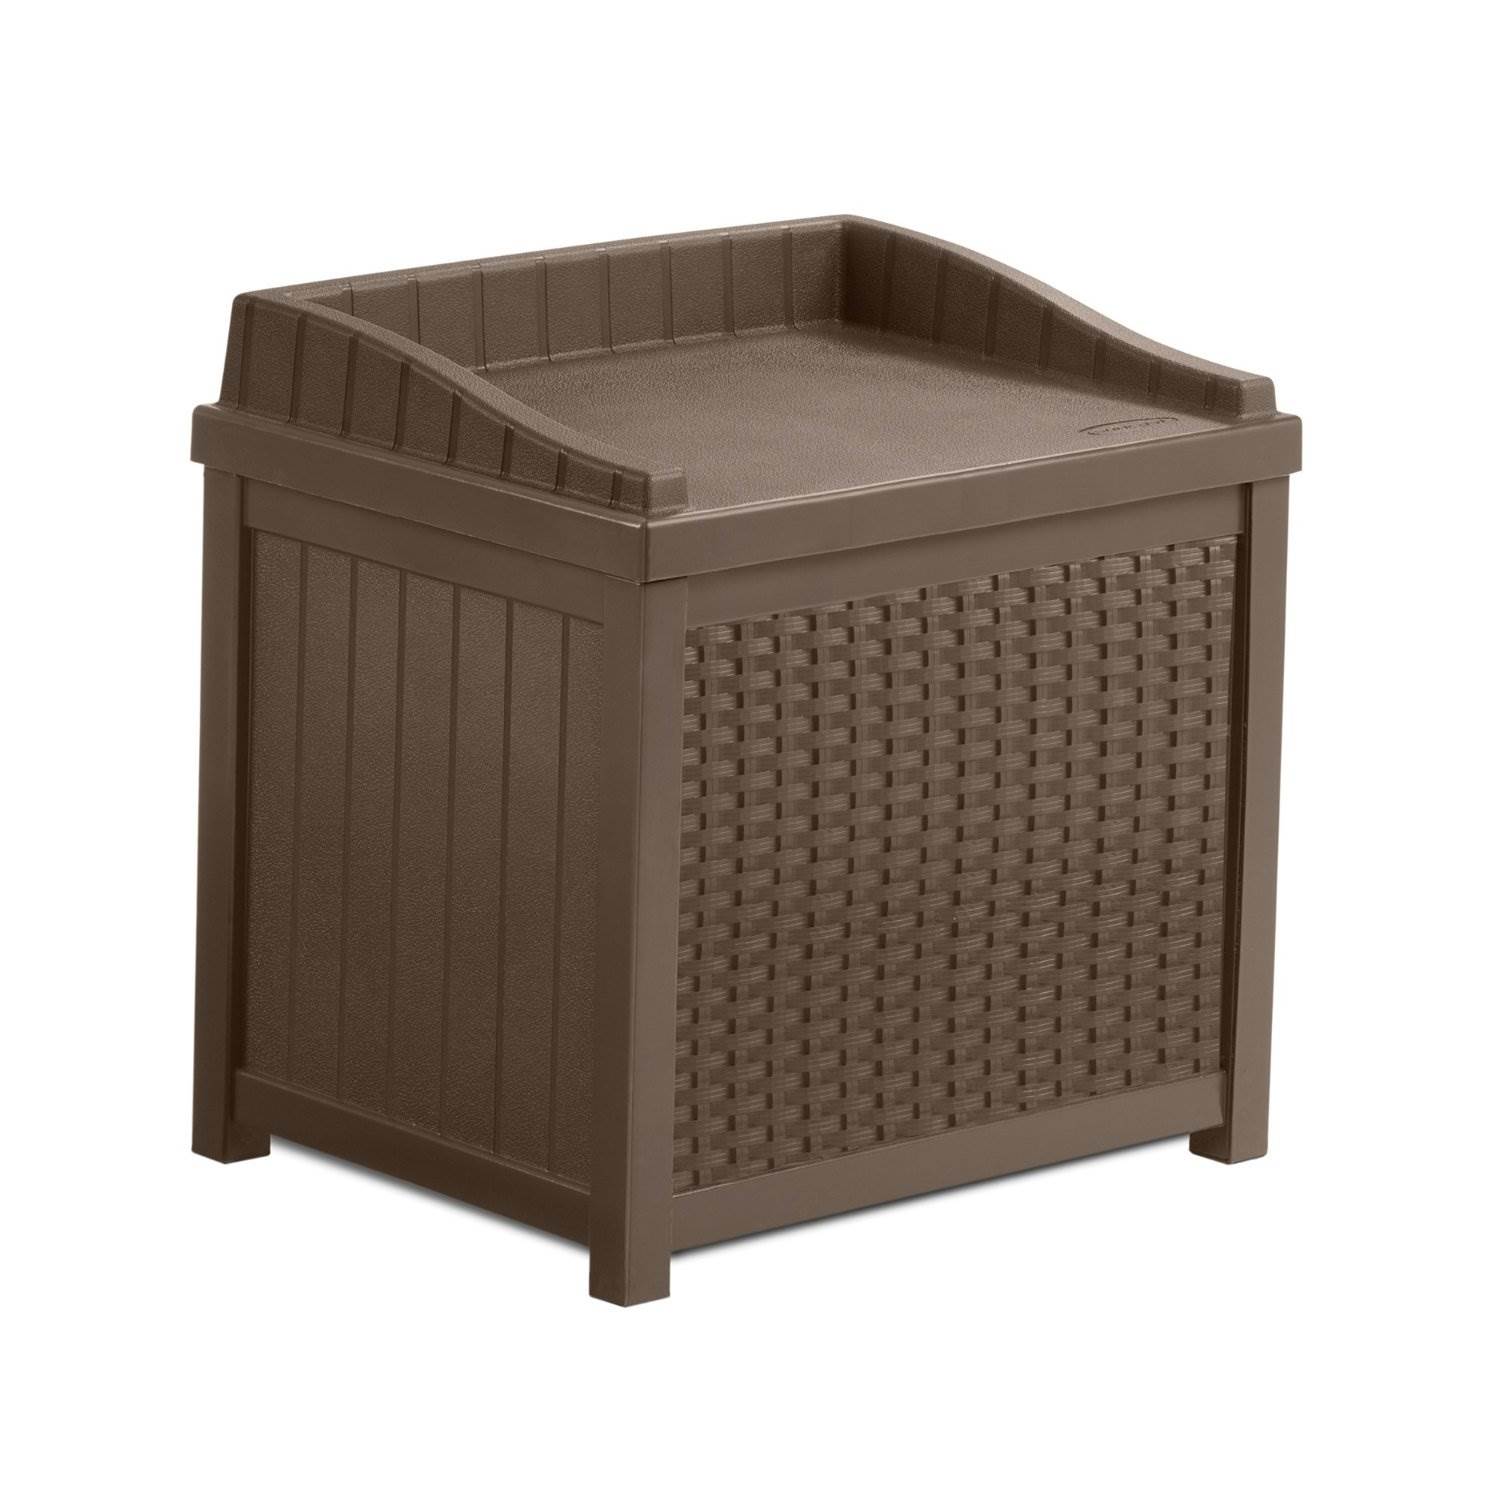 Suncast Outdoor 22 Gallon Resin and Wicker Deck Box with Seat, Java Brown - image 1 of 9